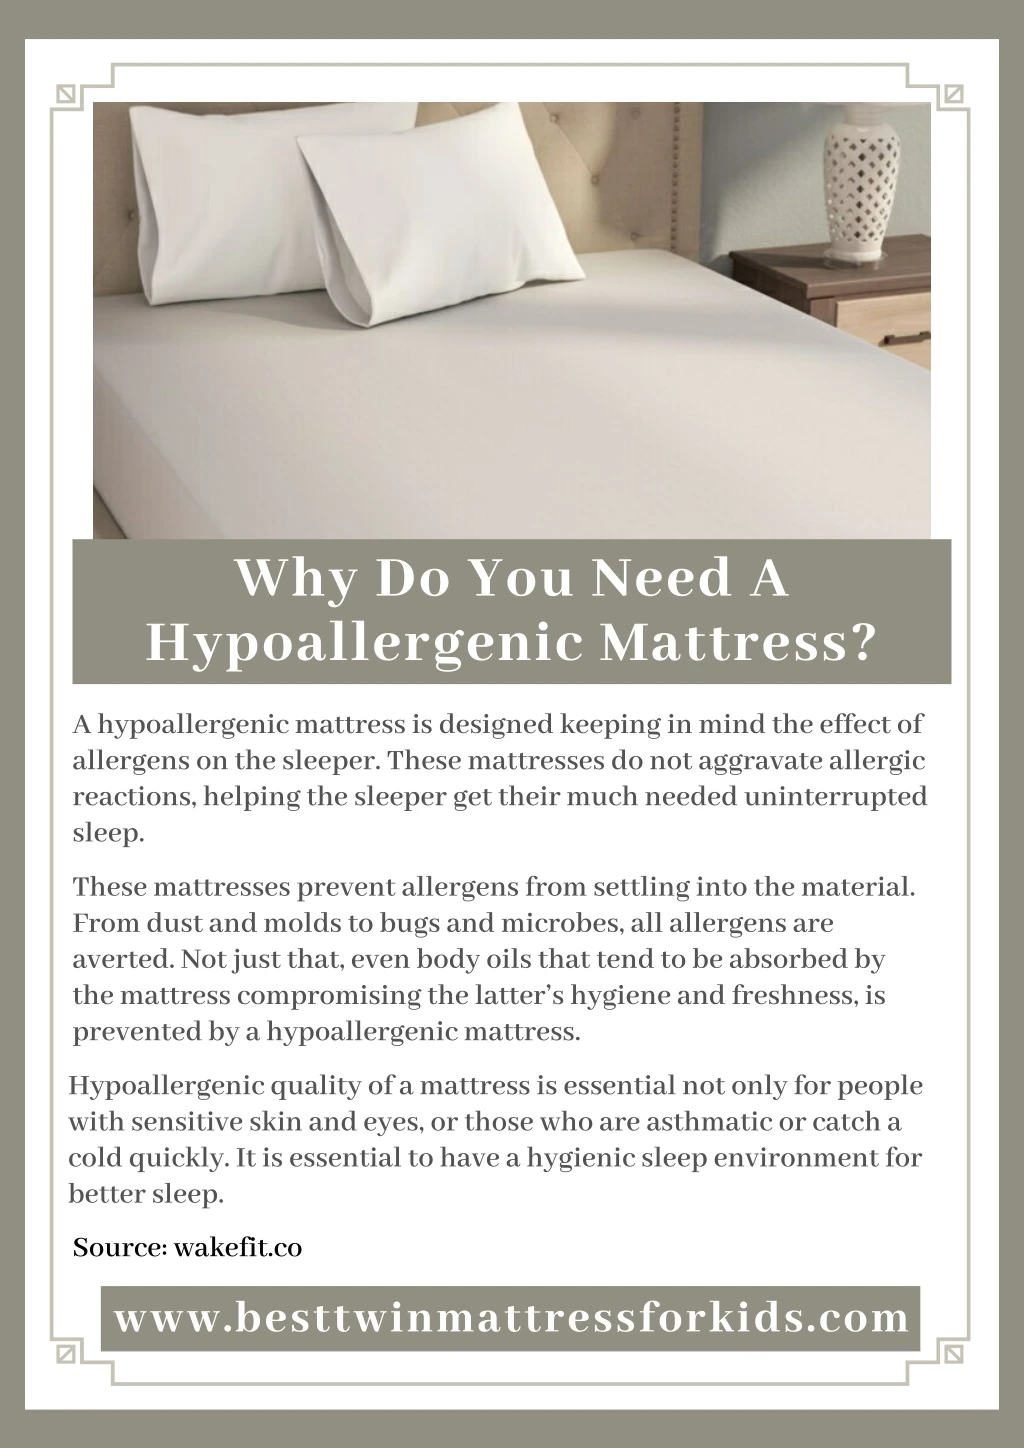 why do you need a hypoallergenic mattress